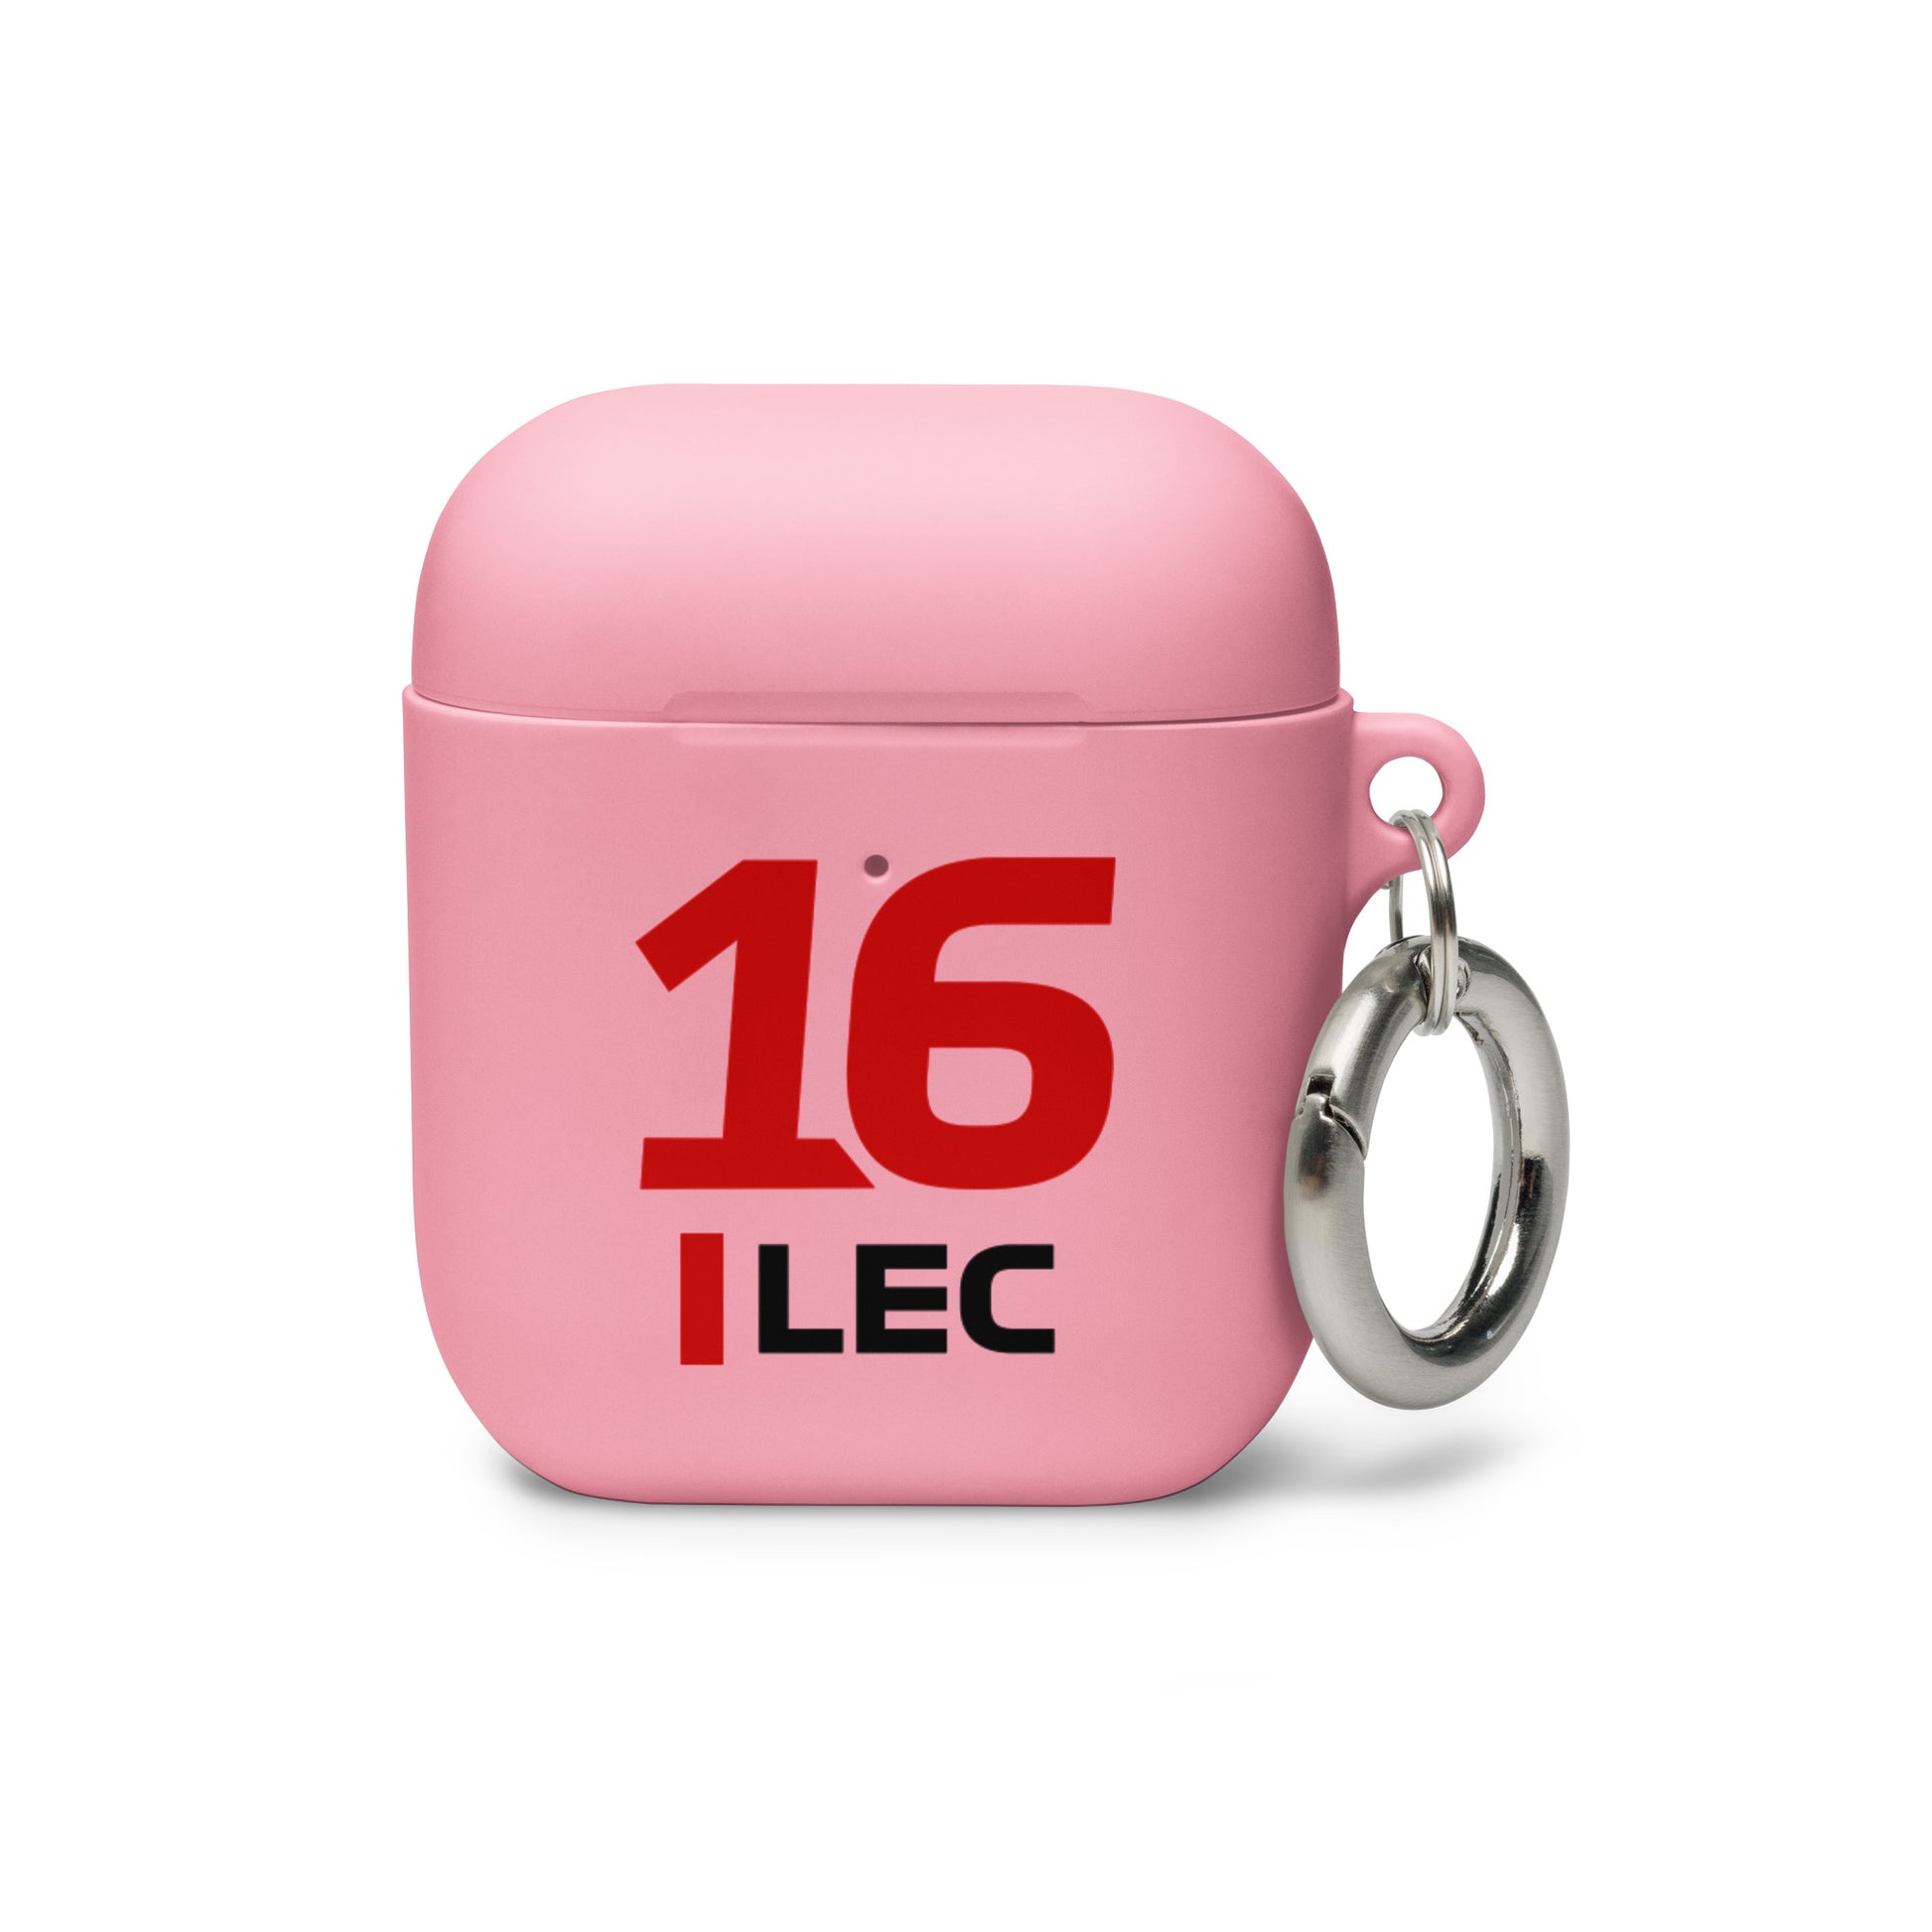 Charles Leclerc AirPods Case pink